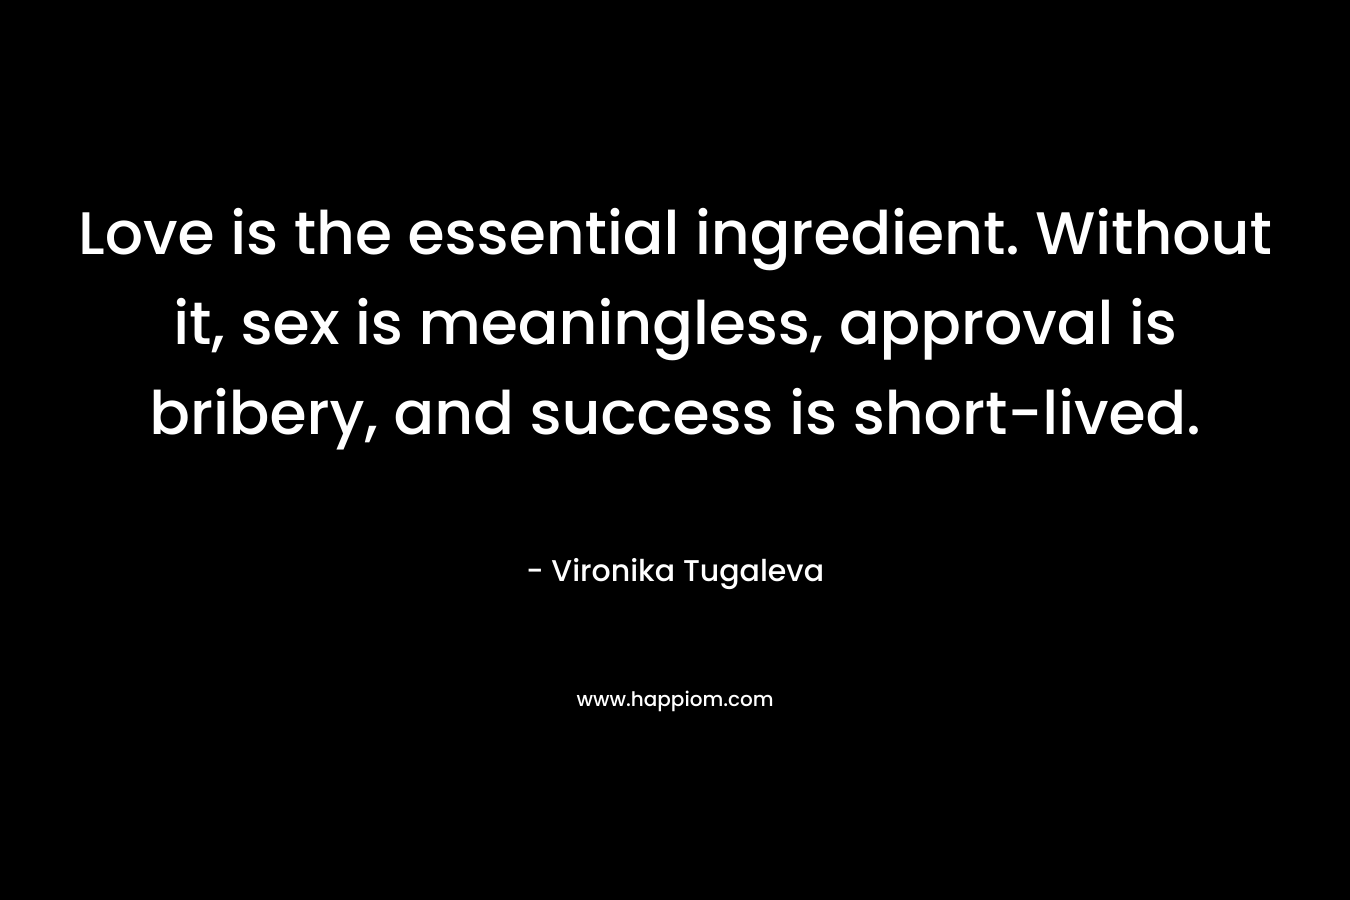 Love is the essential ingredient. Without it, sex is meaningless, approval is bribery, and success is short-lived. – Vironika Tugaleva